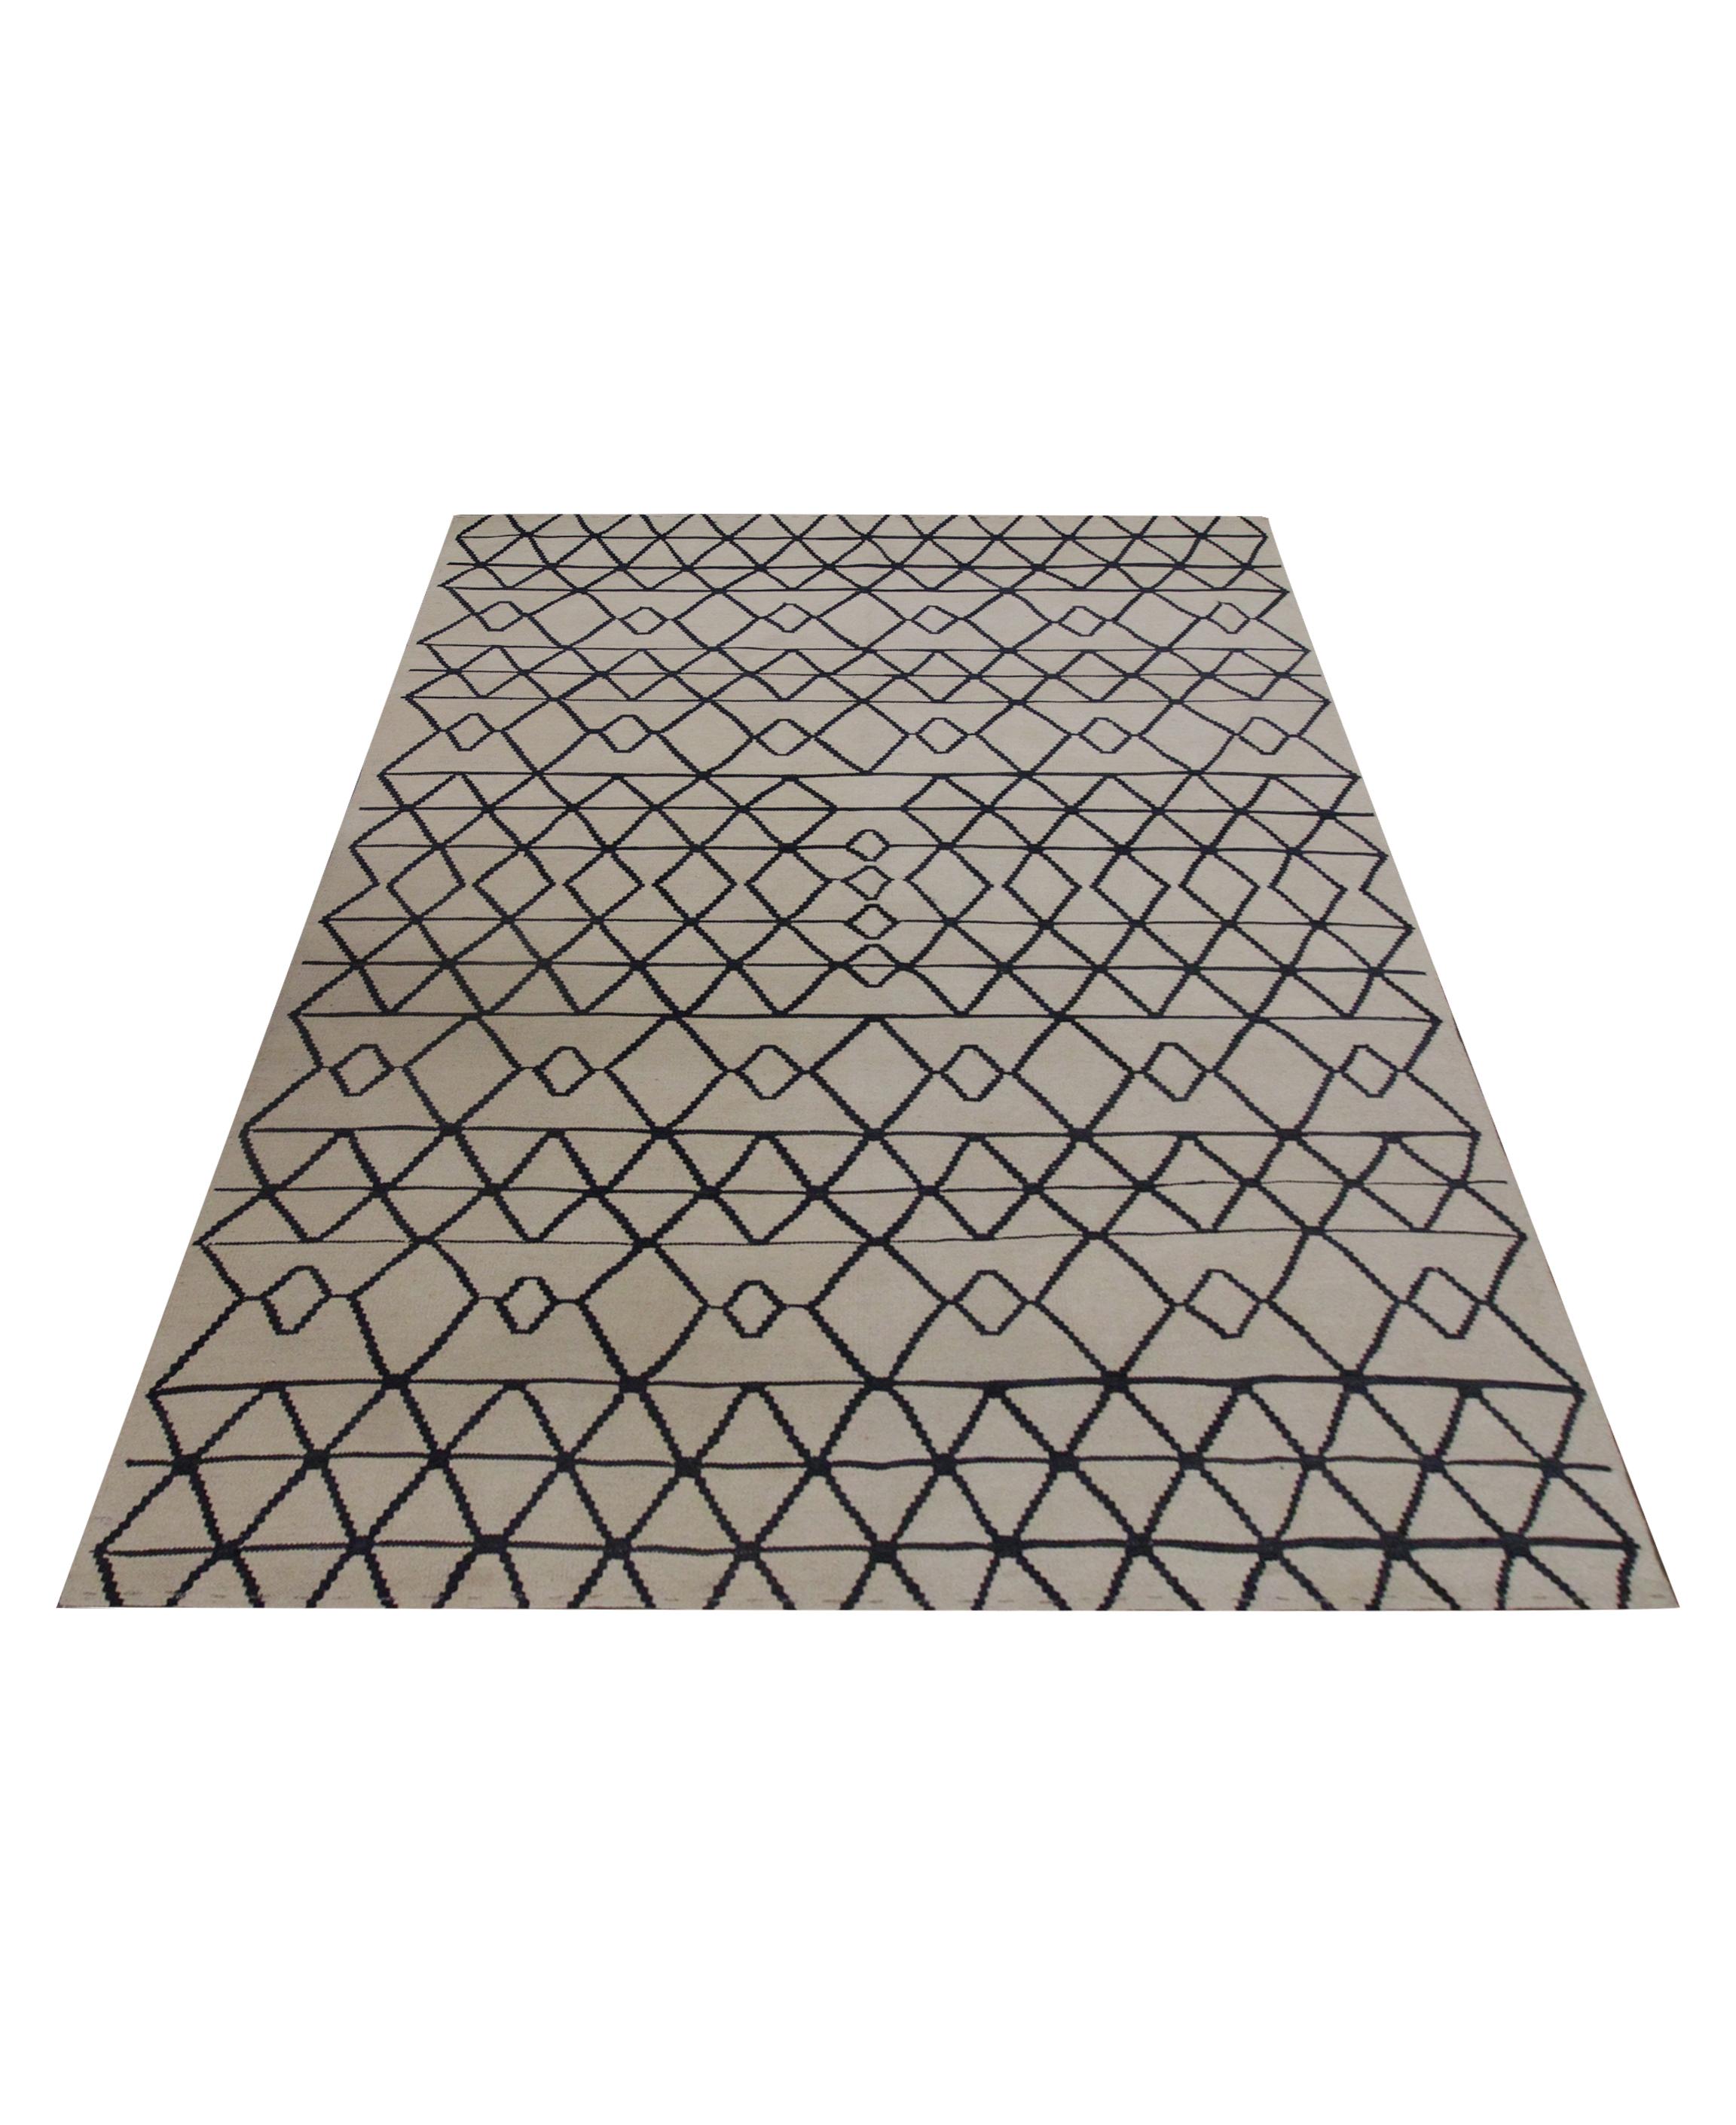 This fine wool Kilim is a New Modern Afghan area rug woven with a simple colour palette of cream and black. The black accents make up the symmetrical geometric pattern, creating a bold, eye-catching rug. Similar to the Scandinavian design, this